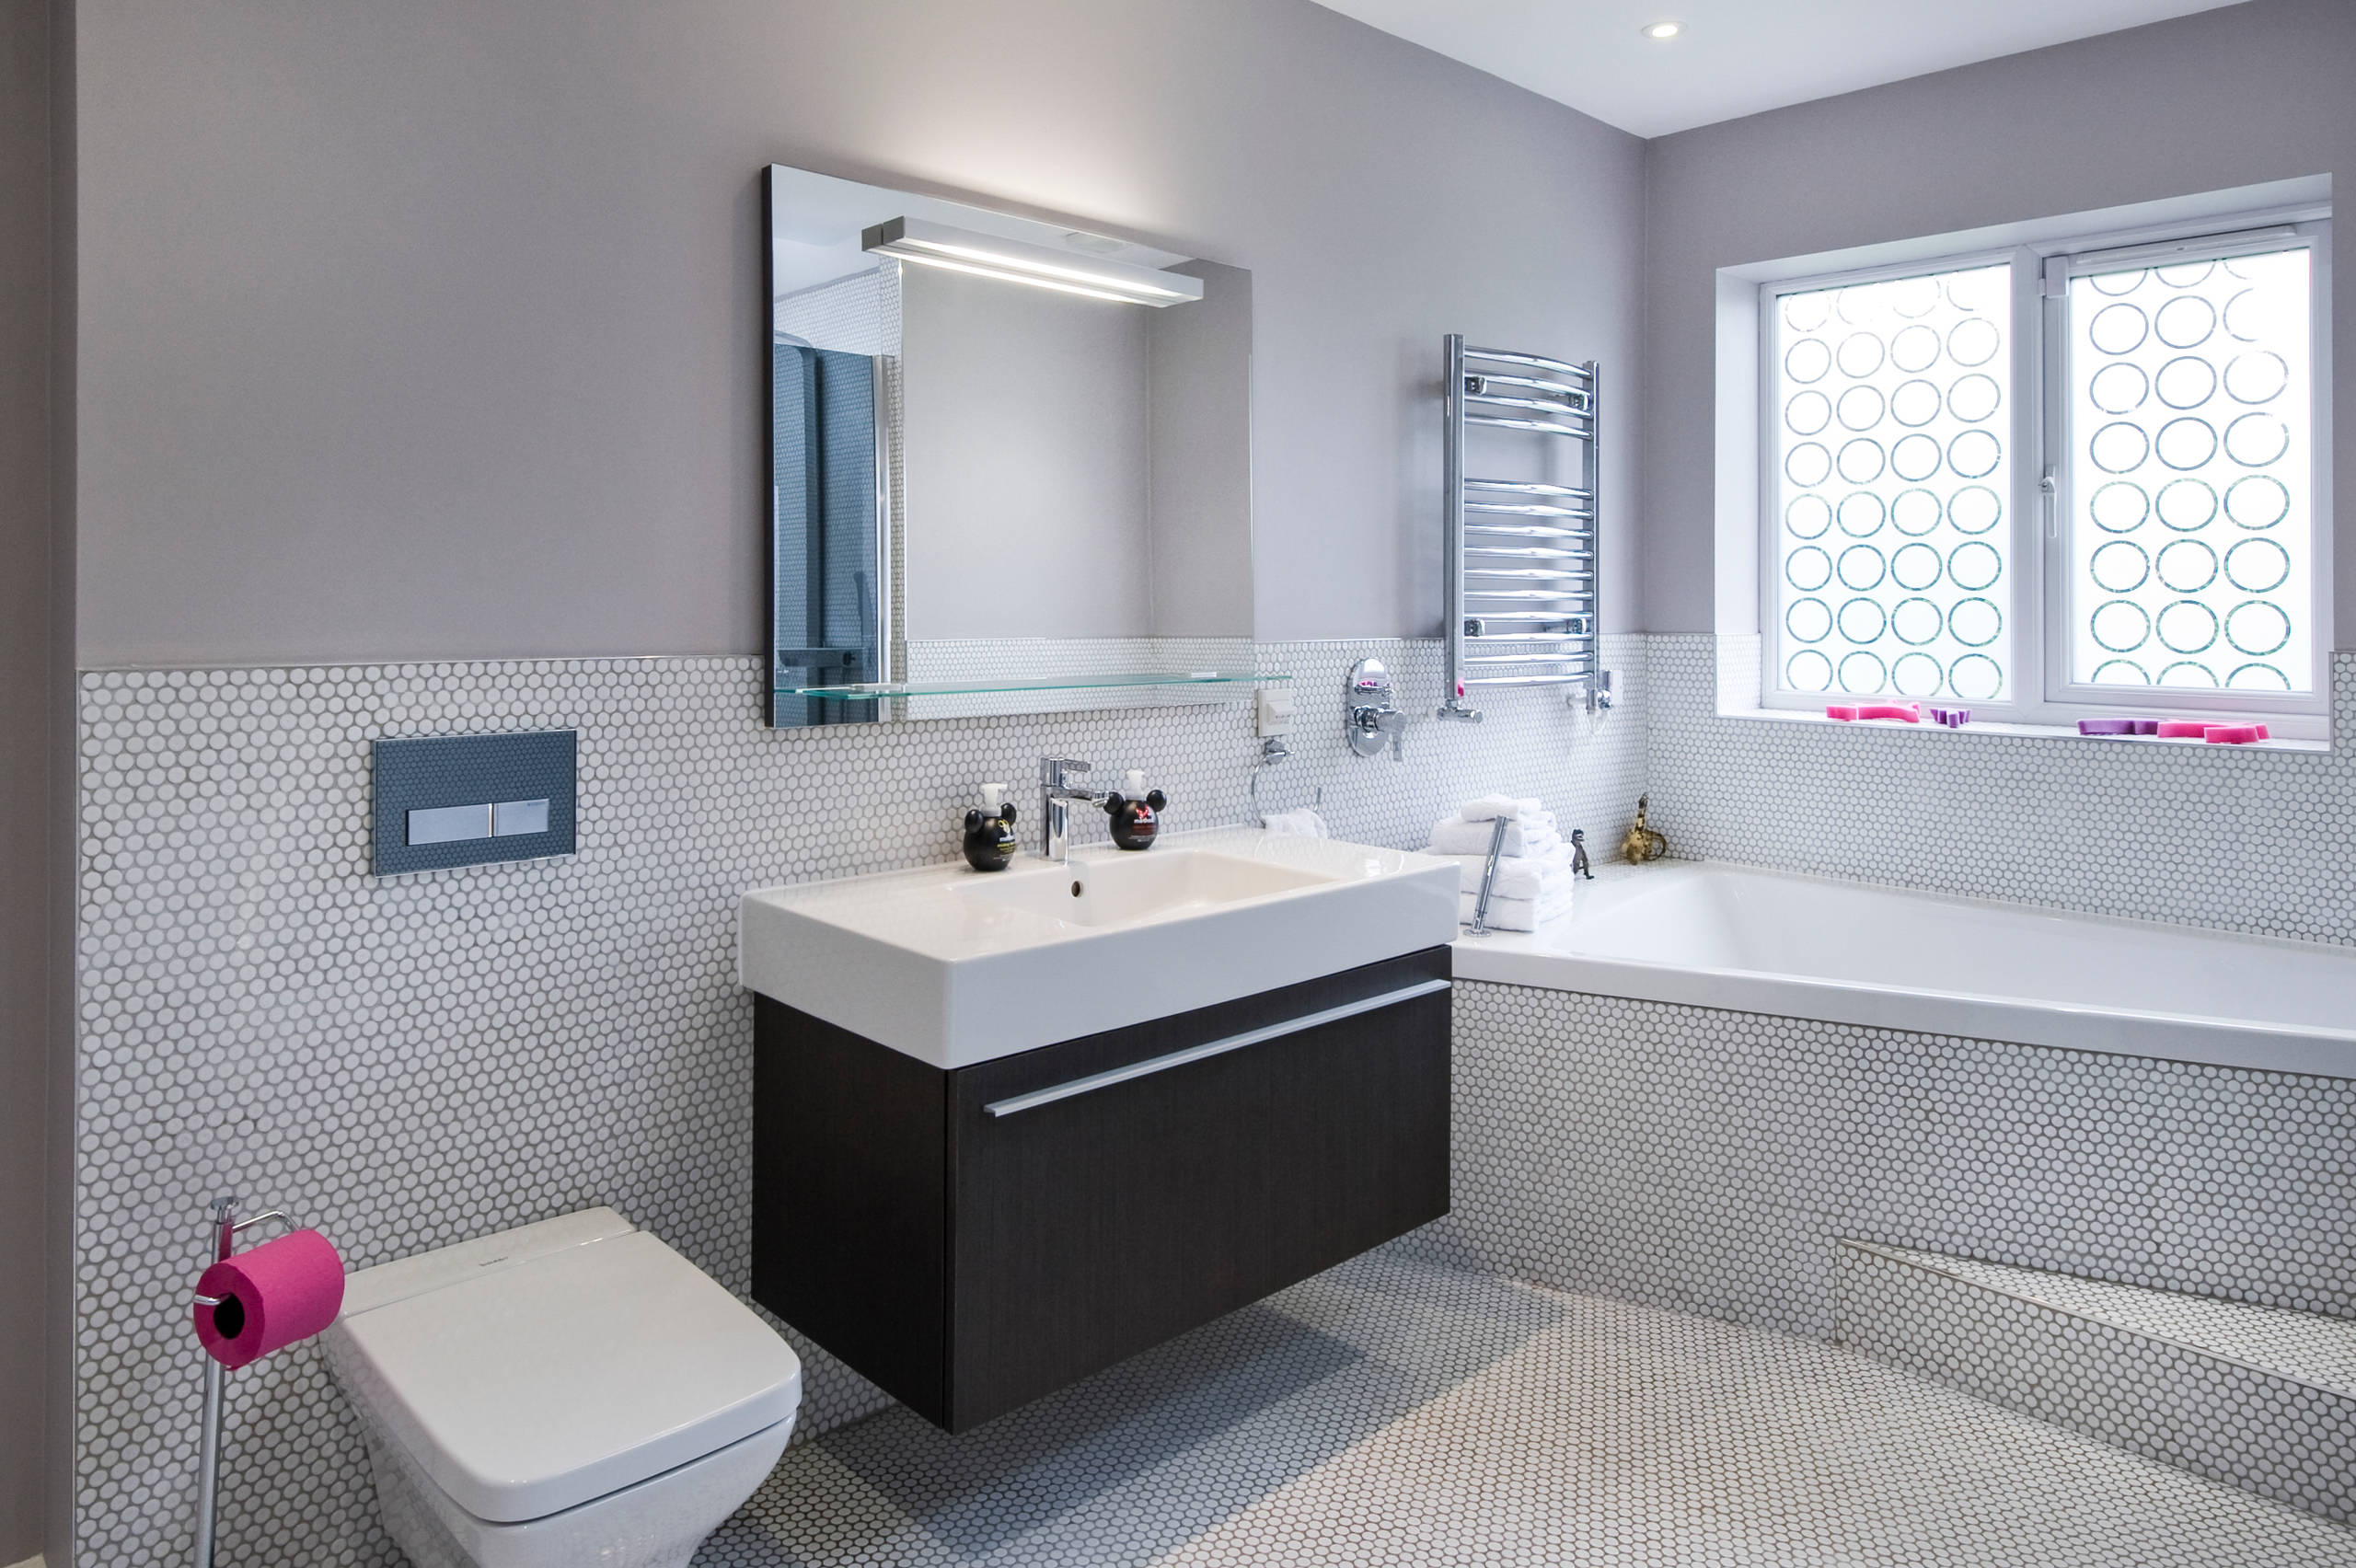 Pictures Of Tiled Bathrooms Houzz, Pictures Of Tiled Bathrooms